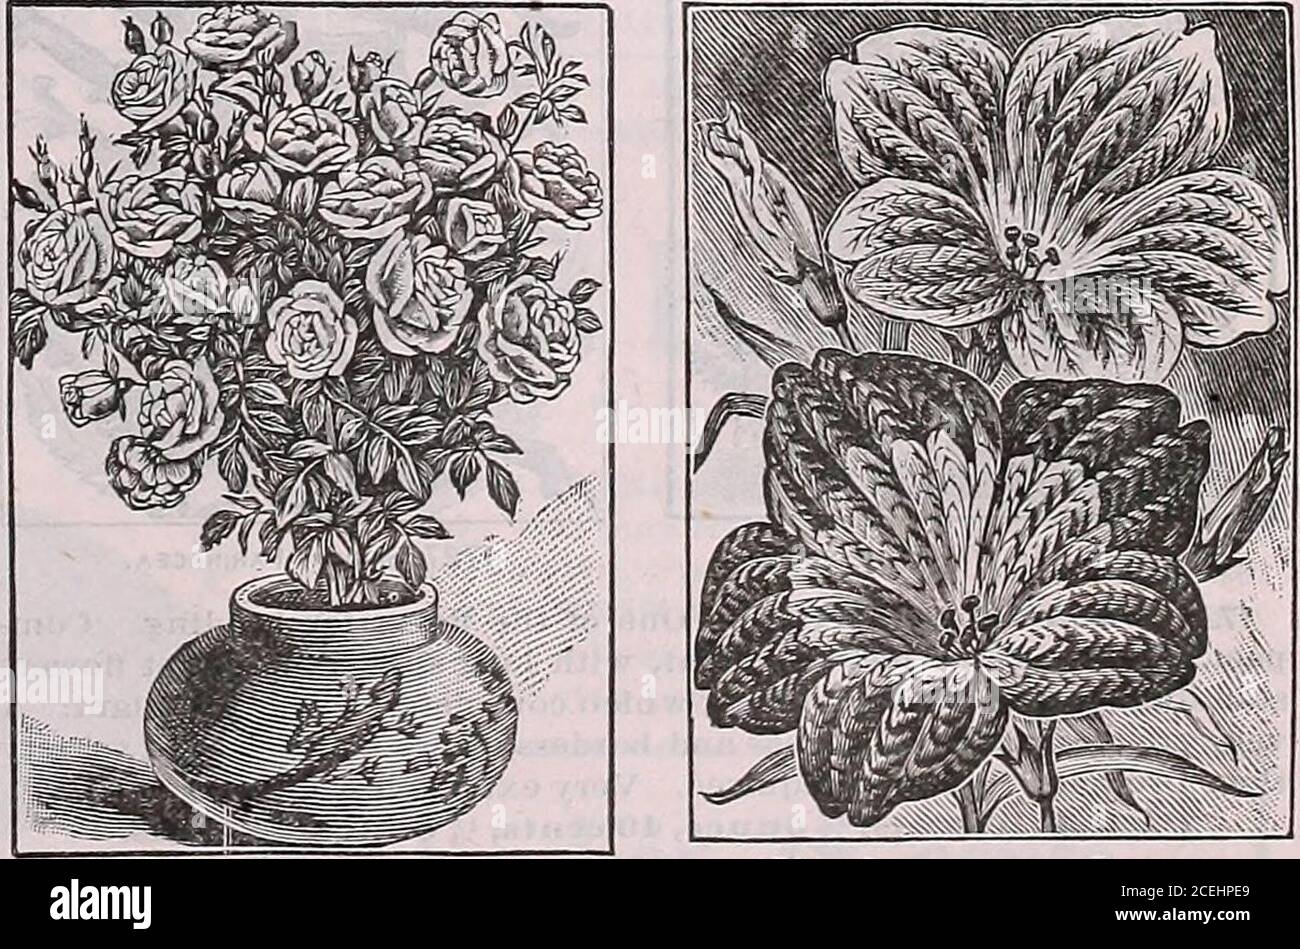 . The Maule seed book for 1922. /^ pound, 60 cents.. 1716 Rose, Little Midget. 1721 Salpiglossis, Emperor. ROSE SEED (Miniature Fairy Roses) Hardy Perennial1716 LITTLE MIDGET. Only an Inch across; mostly double. Theyare borne in clusters, and embrace all the tints of the larger roses. Theblossoms are followed by bright red hips or seed pods that are verypretty. The bush grows only 10 inches high. Packet, 10 cents. SALPIGLOSSIS (Painted Tongue)Hardy Annual Height, 18 Inches to 2 feet, bearing many orchid-like flowers 2 to 2)4Inches across, with odd and beautiful velvety markings; the colors red Stock Photo